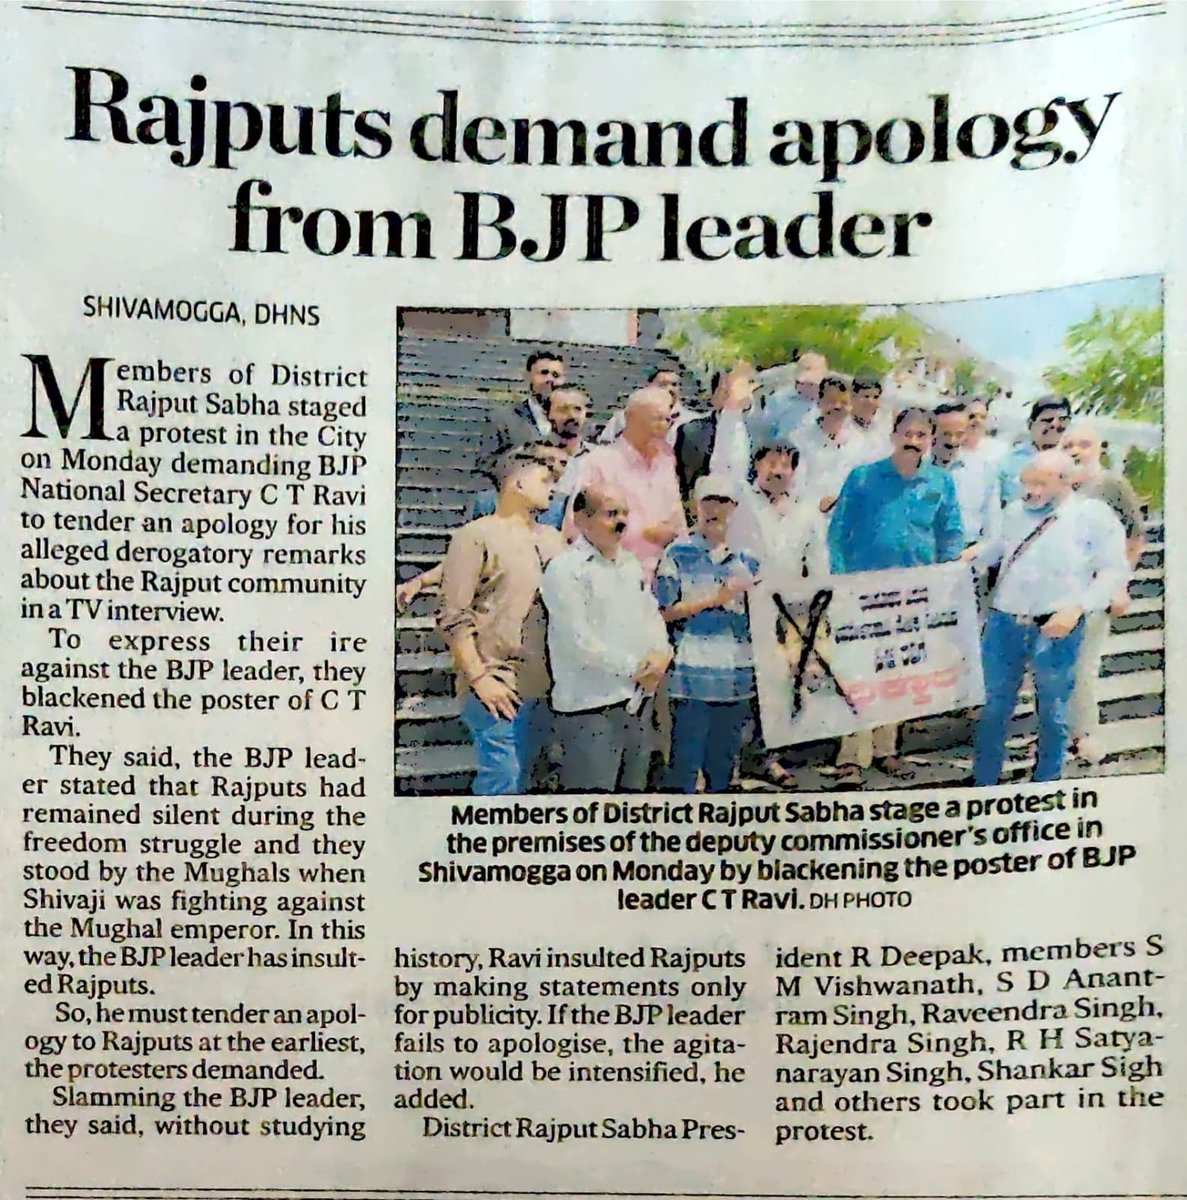 This is not just insult to Rajputs,but to all freedom fighters who fought against British for India's freedom. @CTRavi_BJP must apologise unconditionaly. @JPNadda @rajnathsingh @narendramodi @AmitShah @ranvijaylive @rssurjewala @BJP4India @INCIndia @digvijaya_28 @SupriyaShrinate